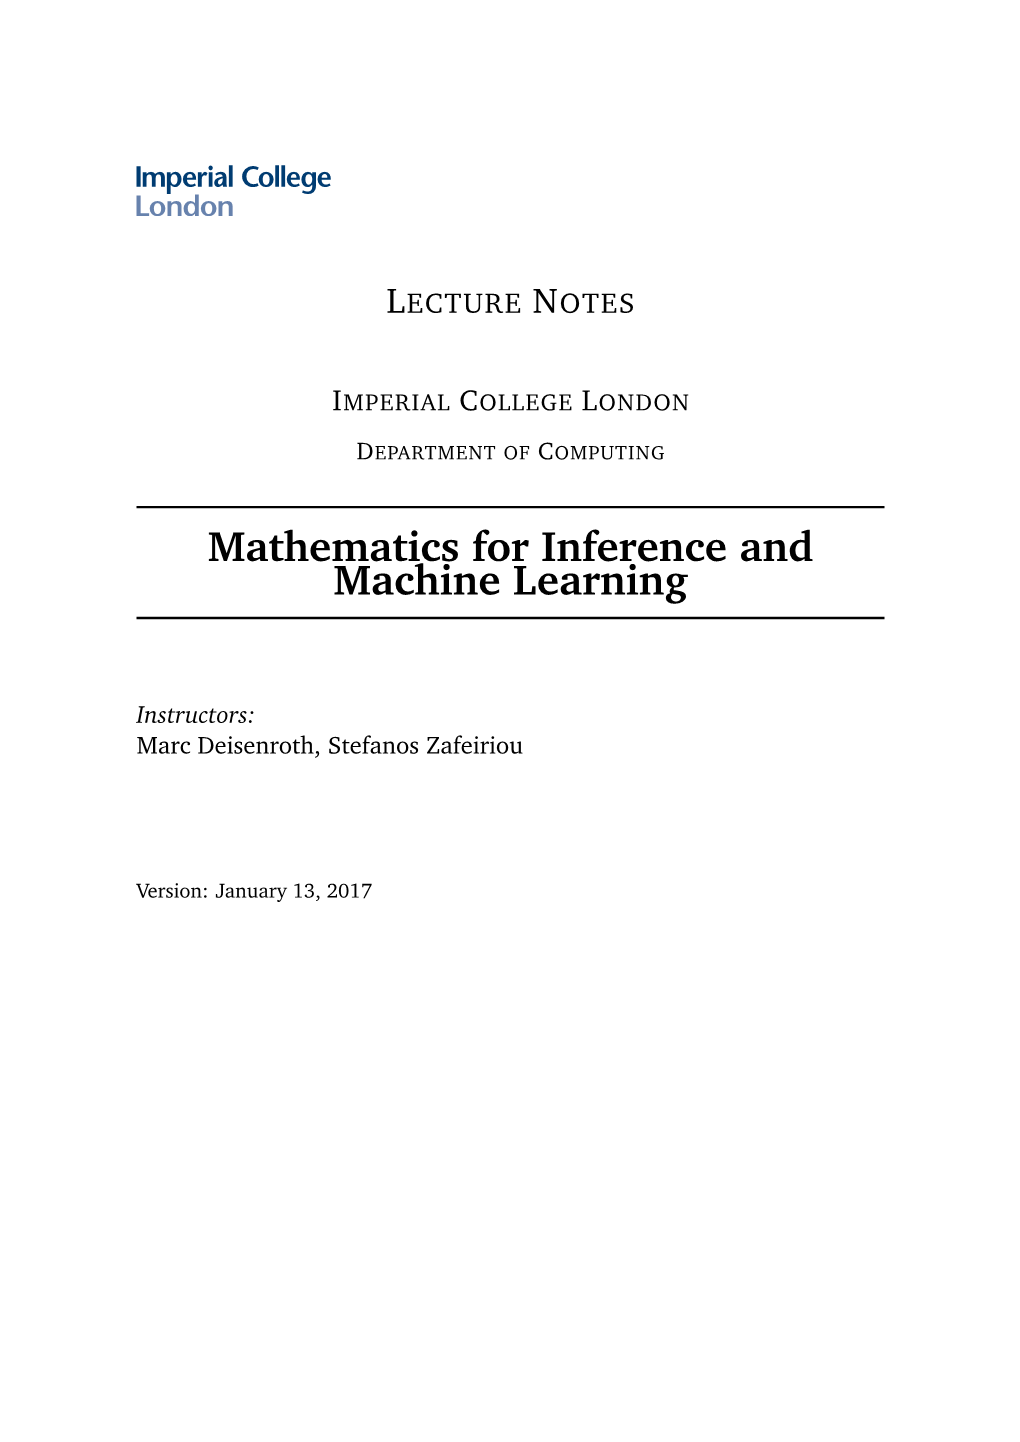 Lecture Notes: Mathematics for Inference and Machine Learning